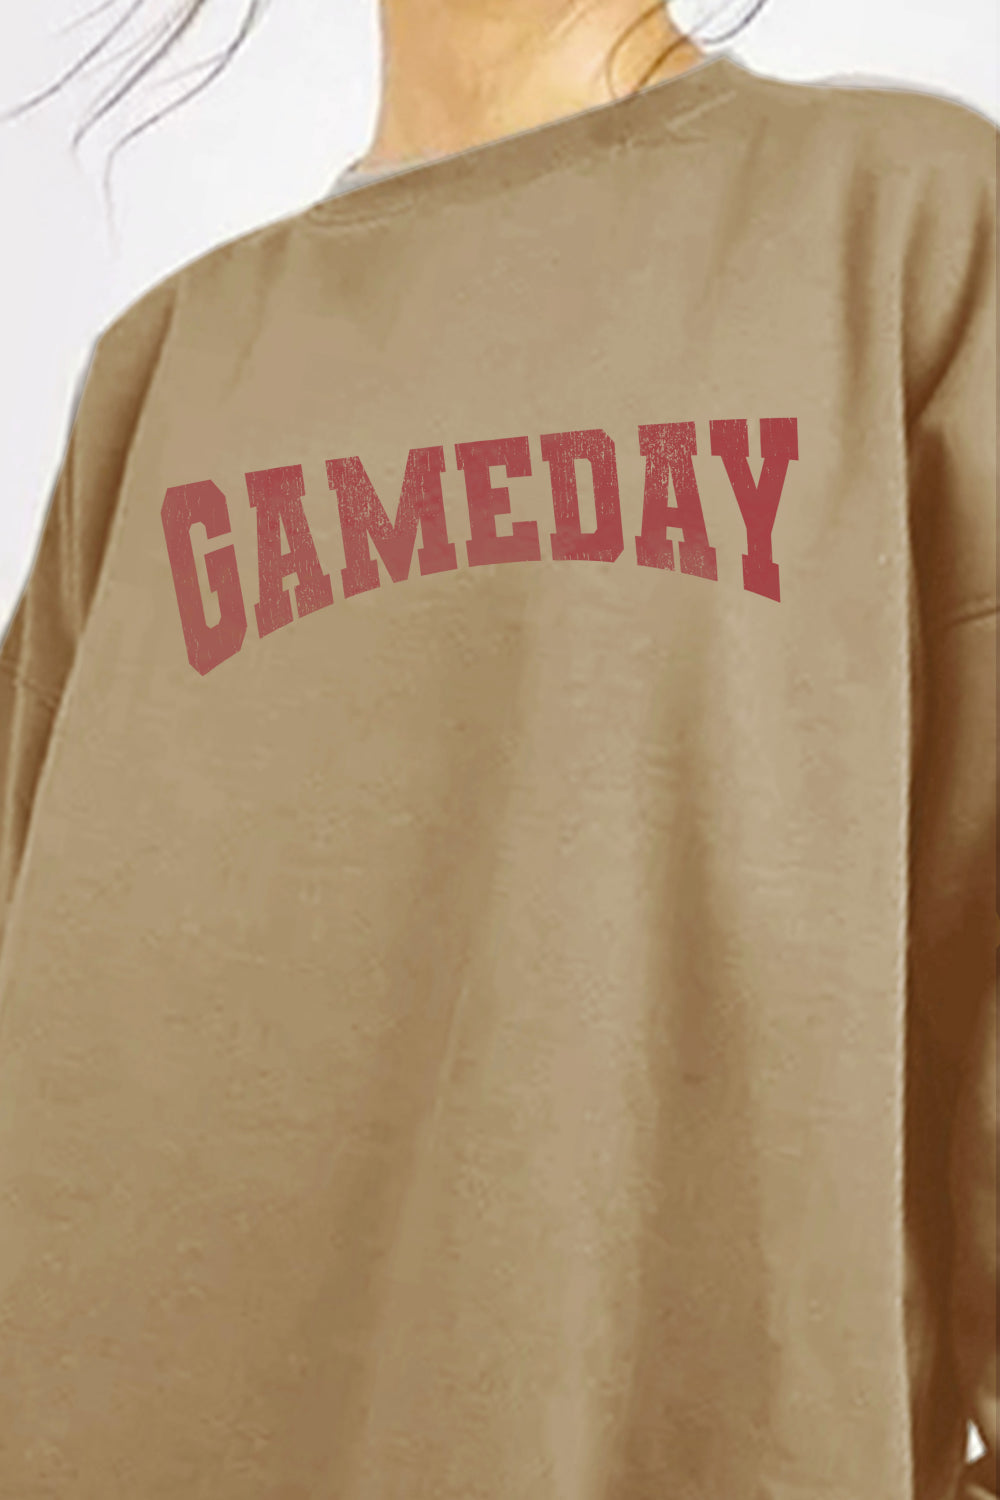 Simply Love GAMEDAY Graphic Sweatshirt - Online Only